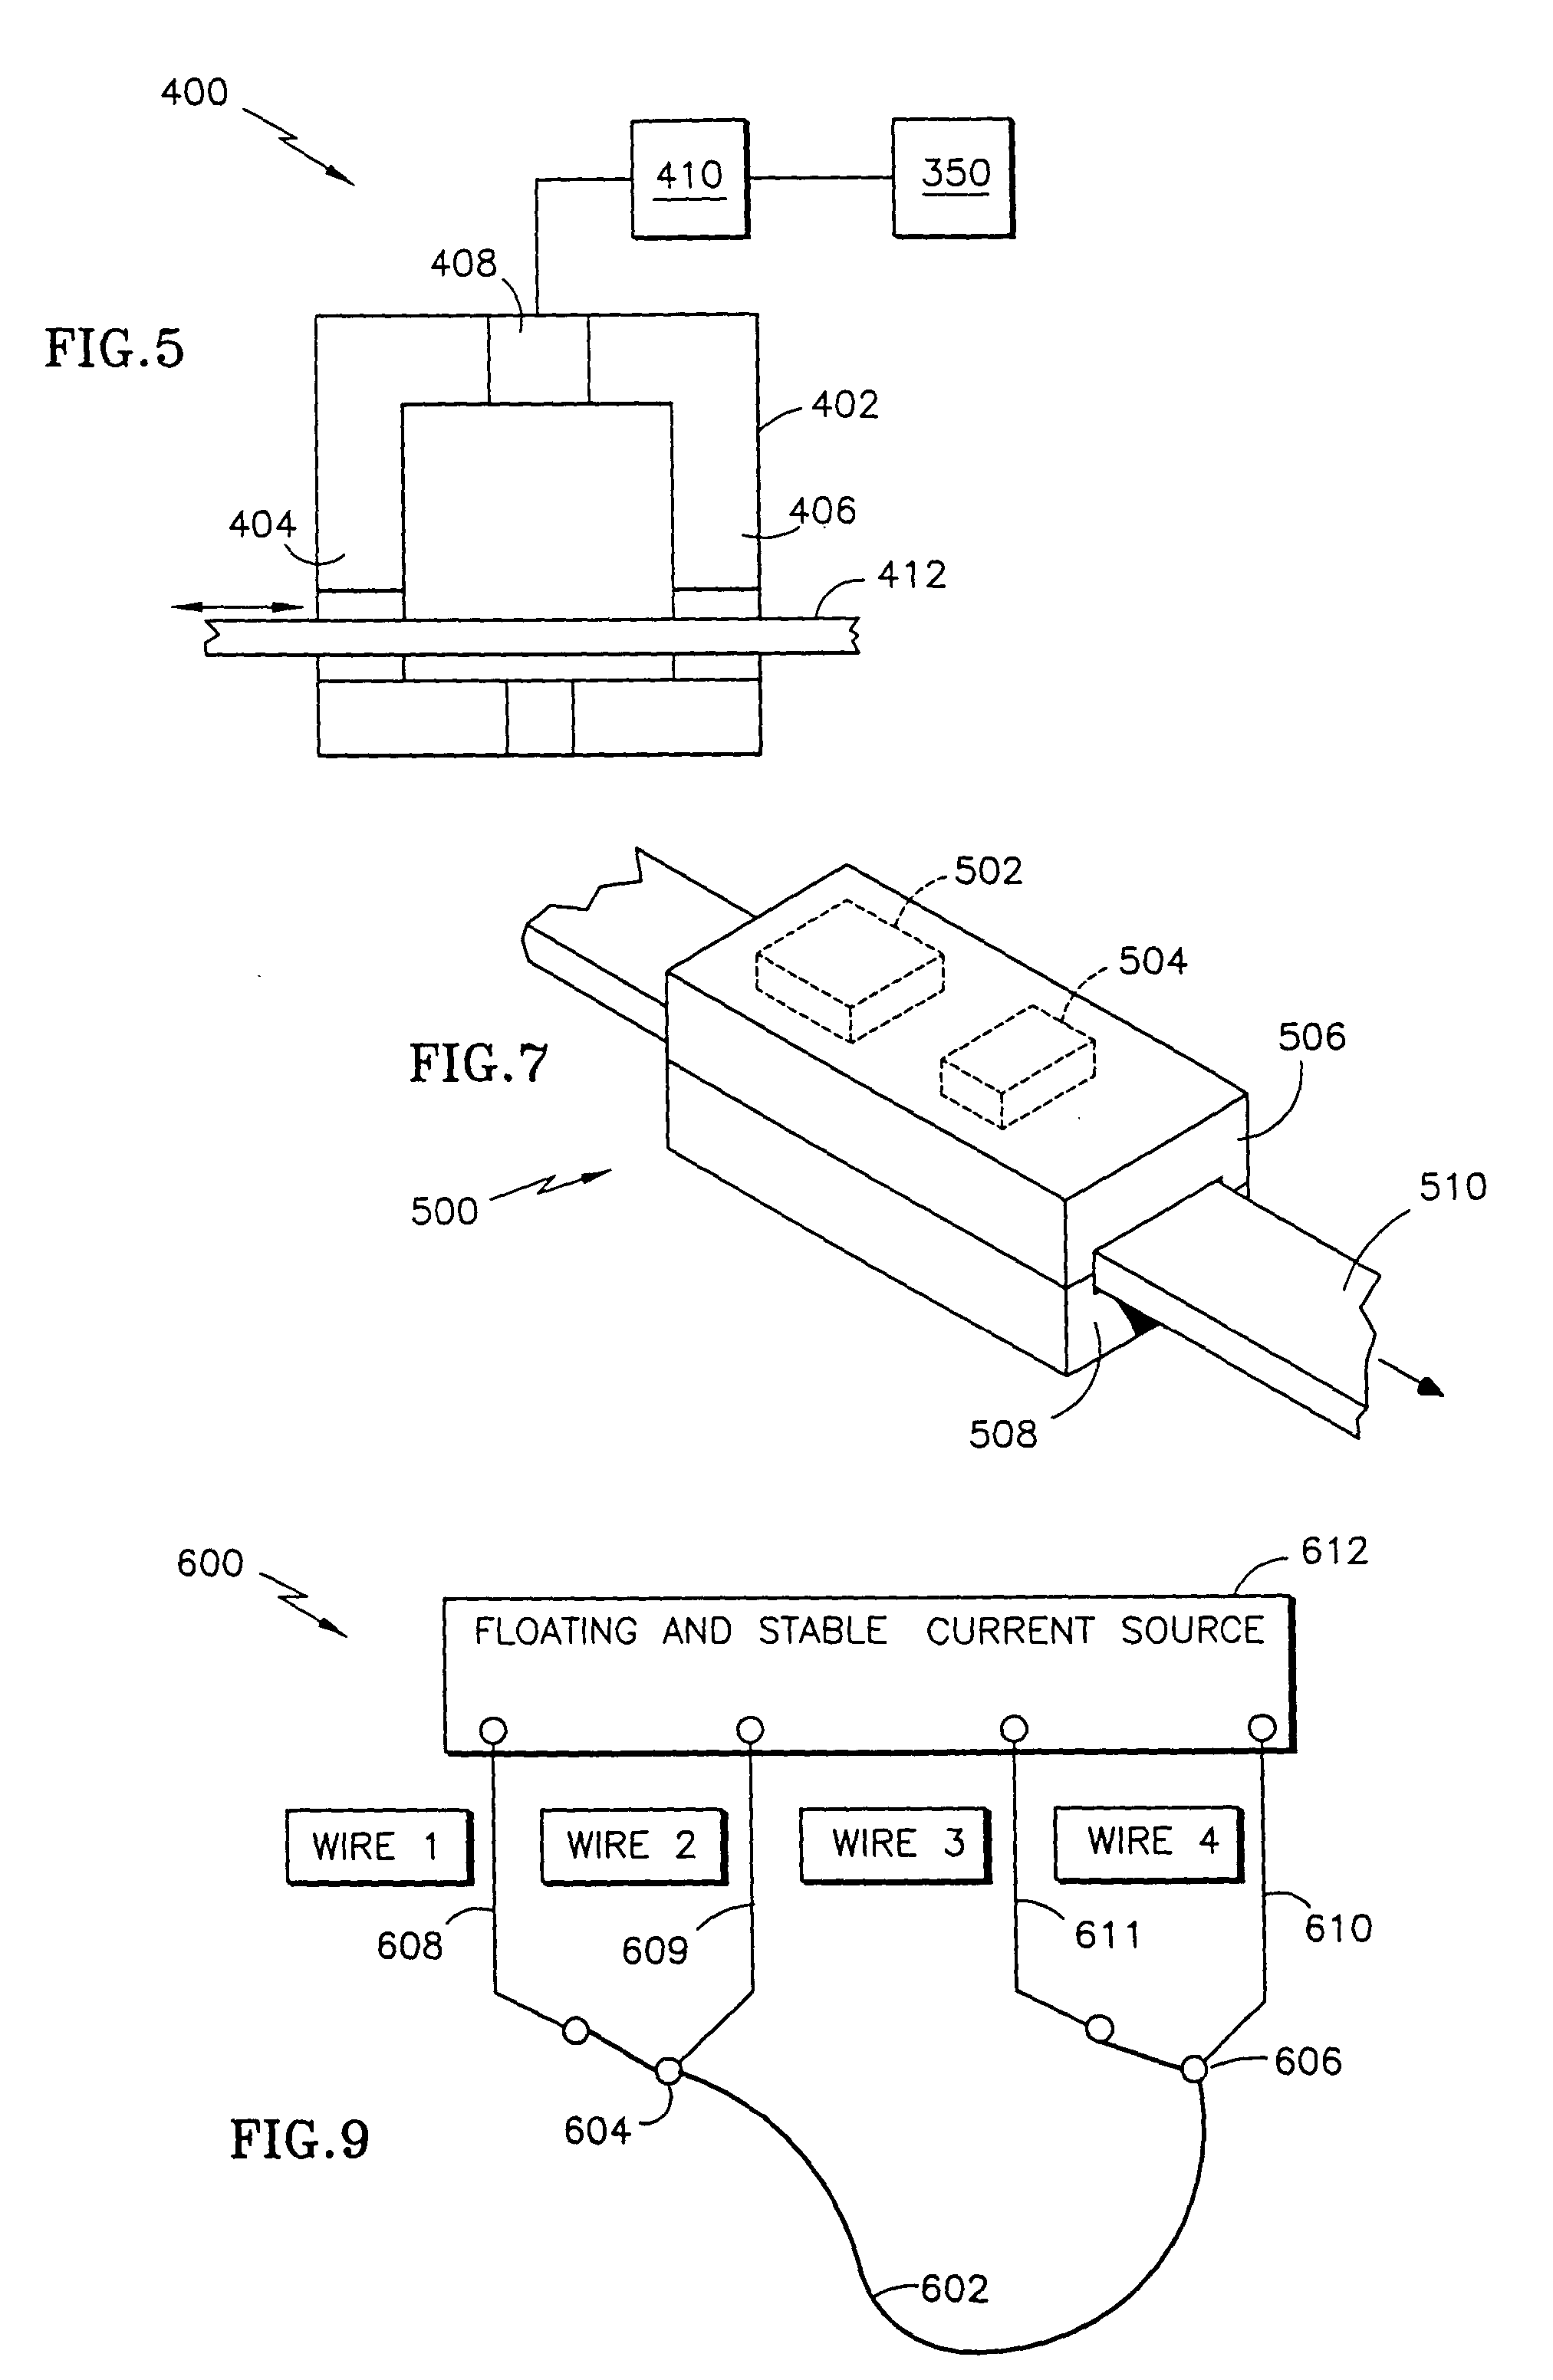 Method and apparatus for detecting elevator rope degradation using electrical resistance